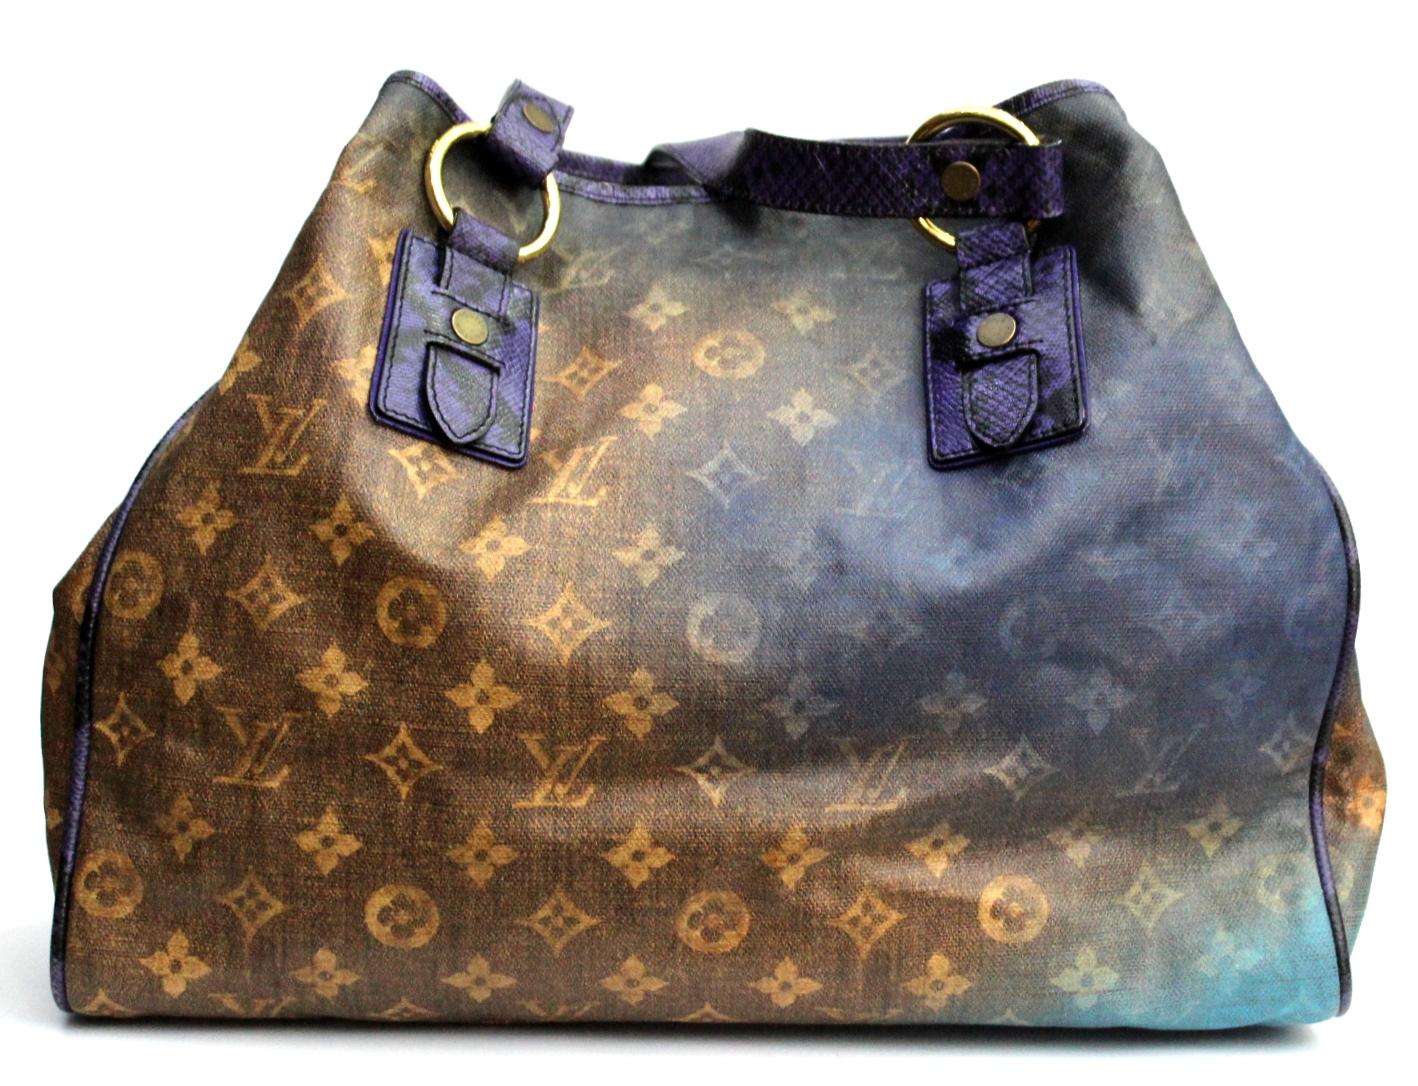 This ultra-spacious Louis Vuitton Limited Edition Richard Prince Mixed Violet Duderanch Oversized Tote Bag is cleverly constructed. Emblazoned with jokes dear to the artist, the Graduate Jokes is crafted of acid colored Monogram canvas with rare